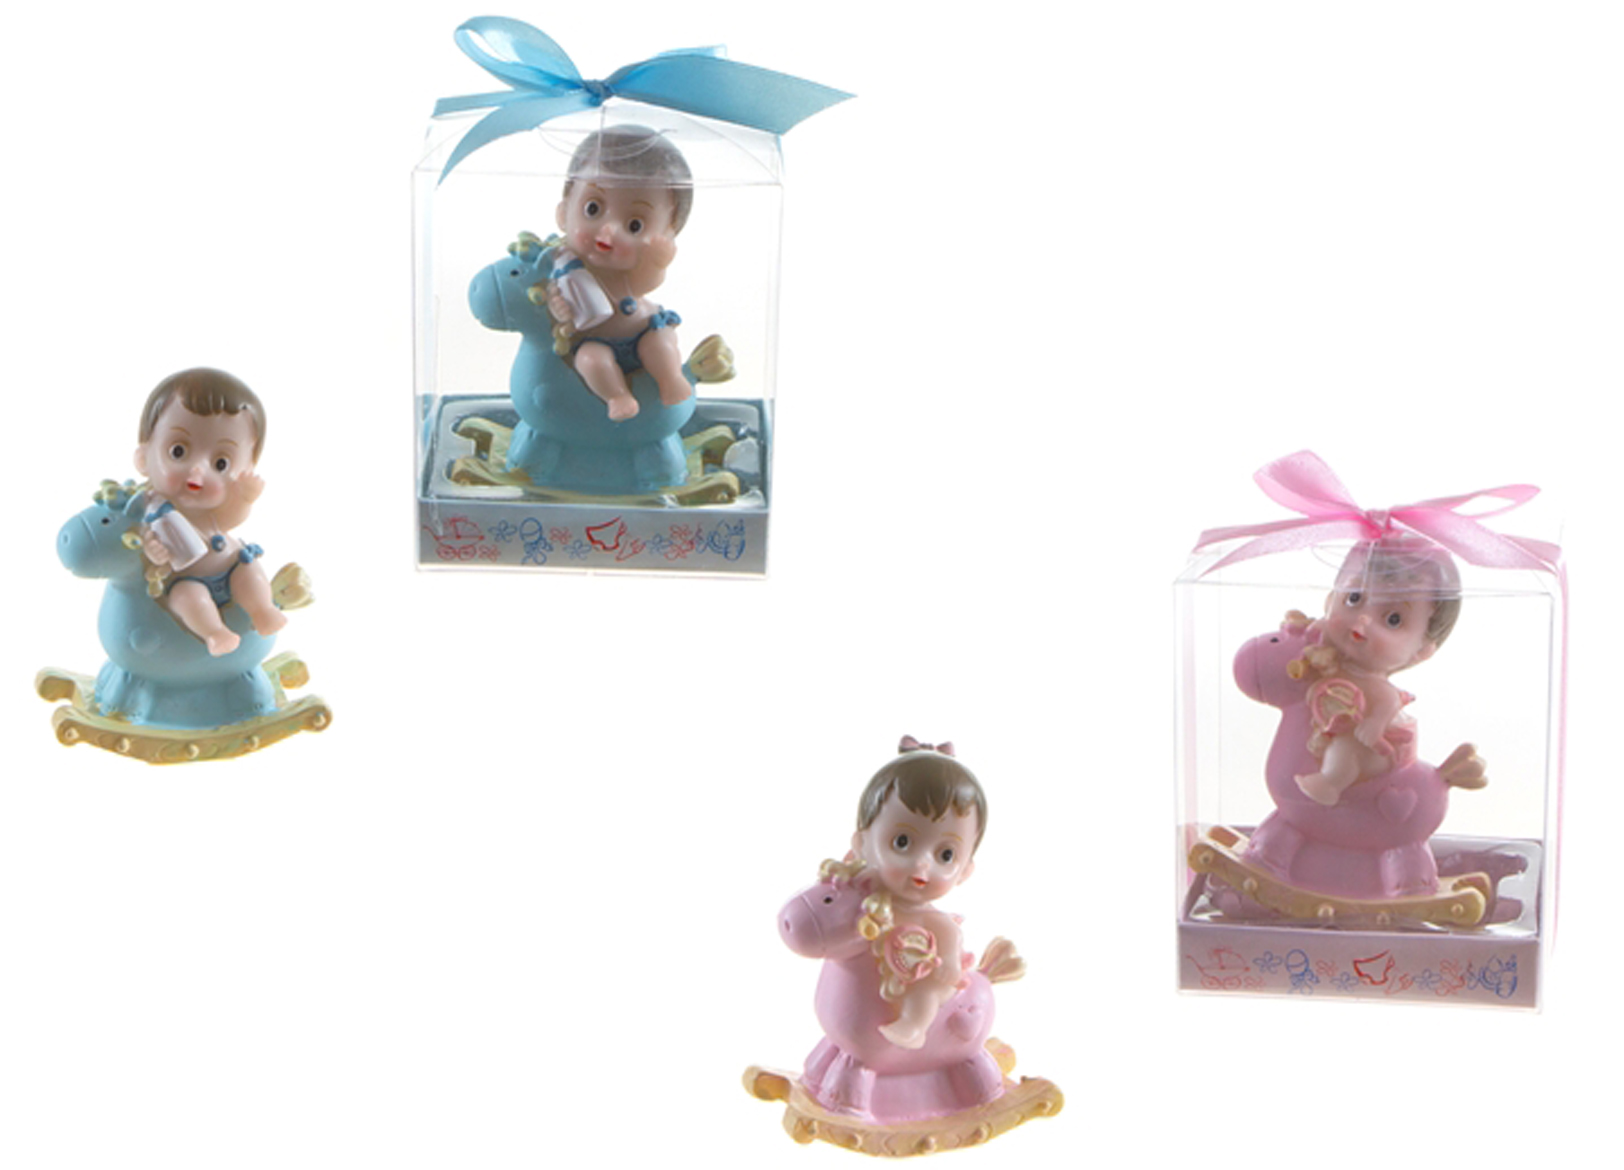 Gender Reveal Baby & TOY Rocking Horse Party Favors w/ Clear Designer Gift Box - Choose Your Color(s